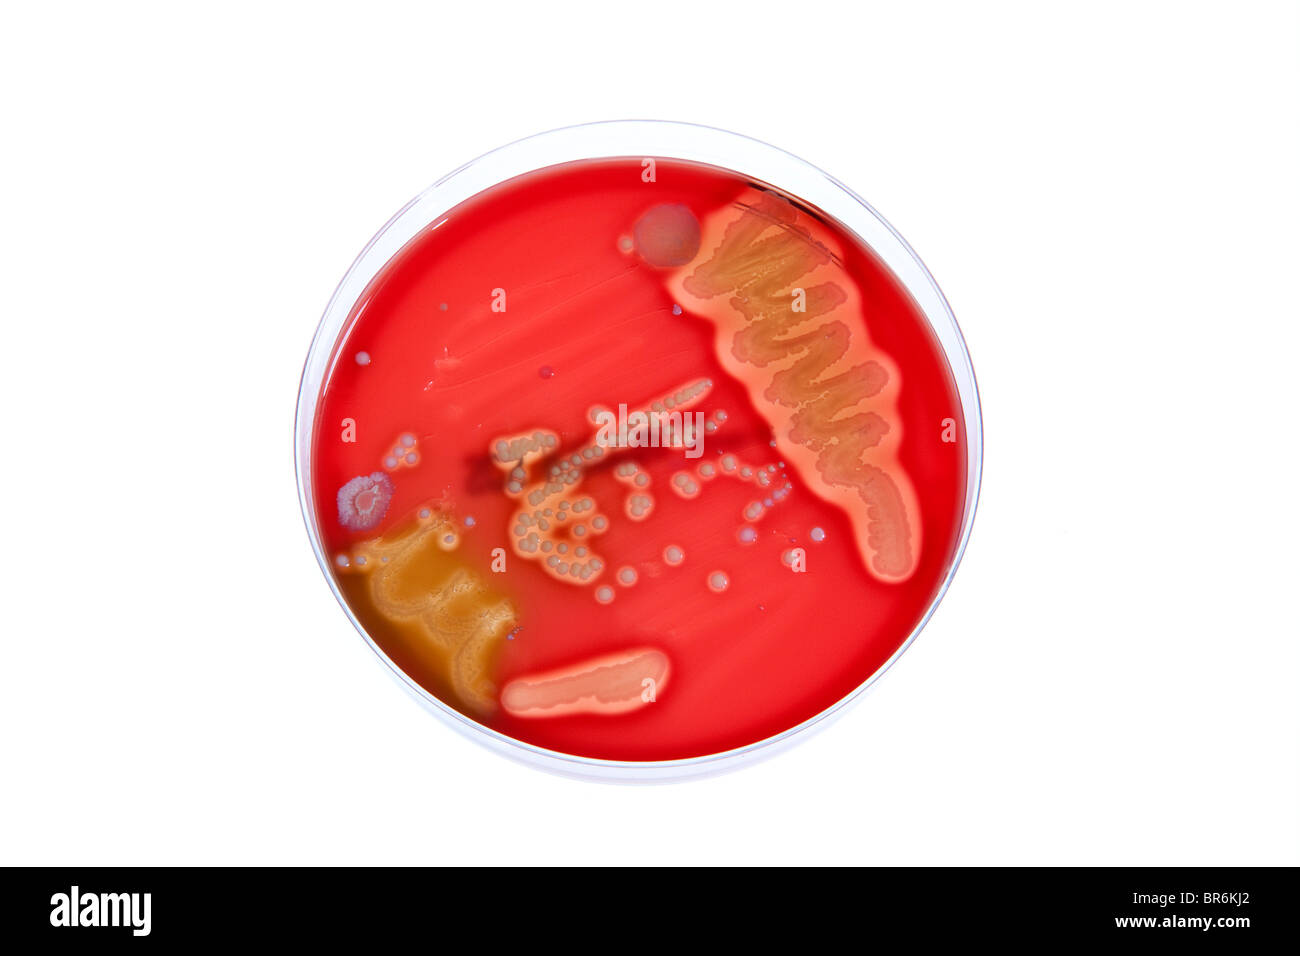 A bacteria culture growing in a Petri dish Stock Photo